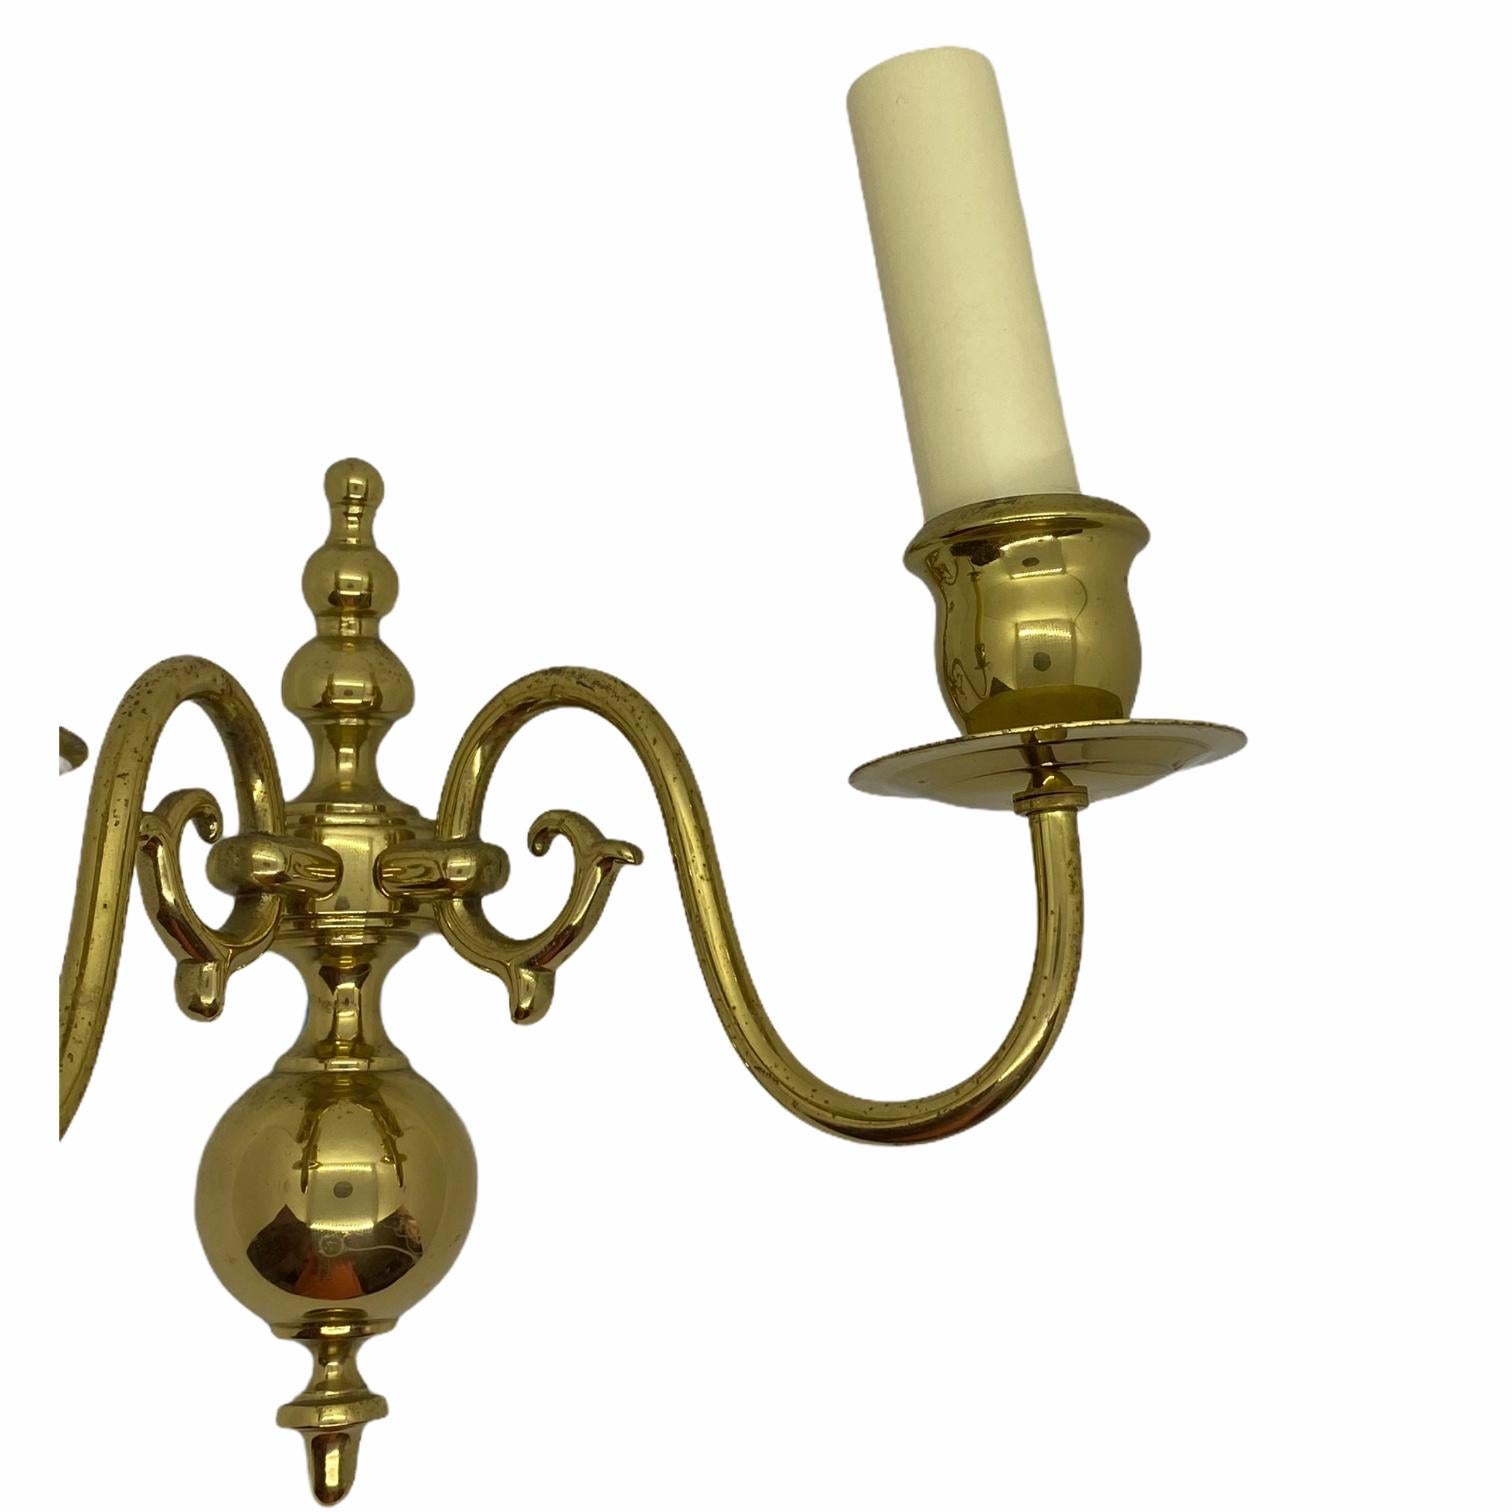 Mid-20th Century Pair of Solid Brass Two-Light Wall Sconces, Vintage, German, 1960s For Sale